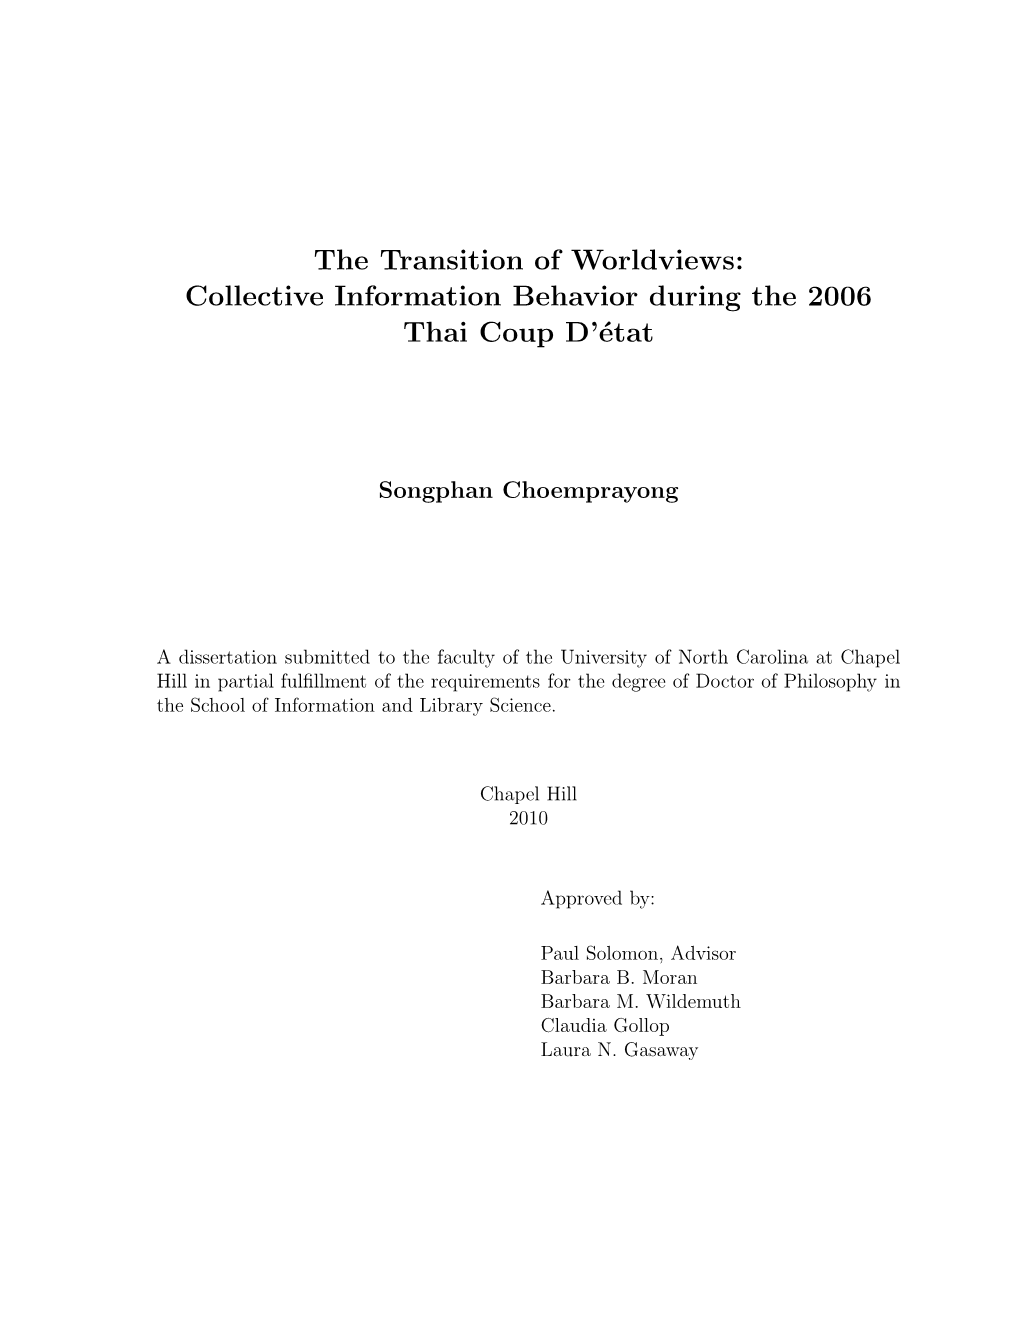 The Transition of Worldviews: Collective Information Behavior During the 2006 Thai Coup D’´Etat